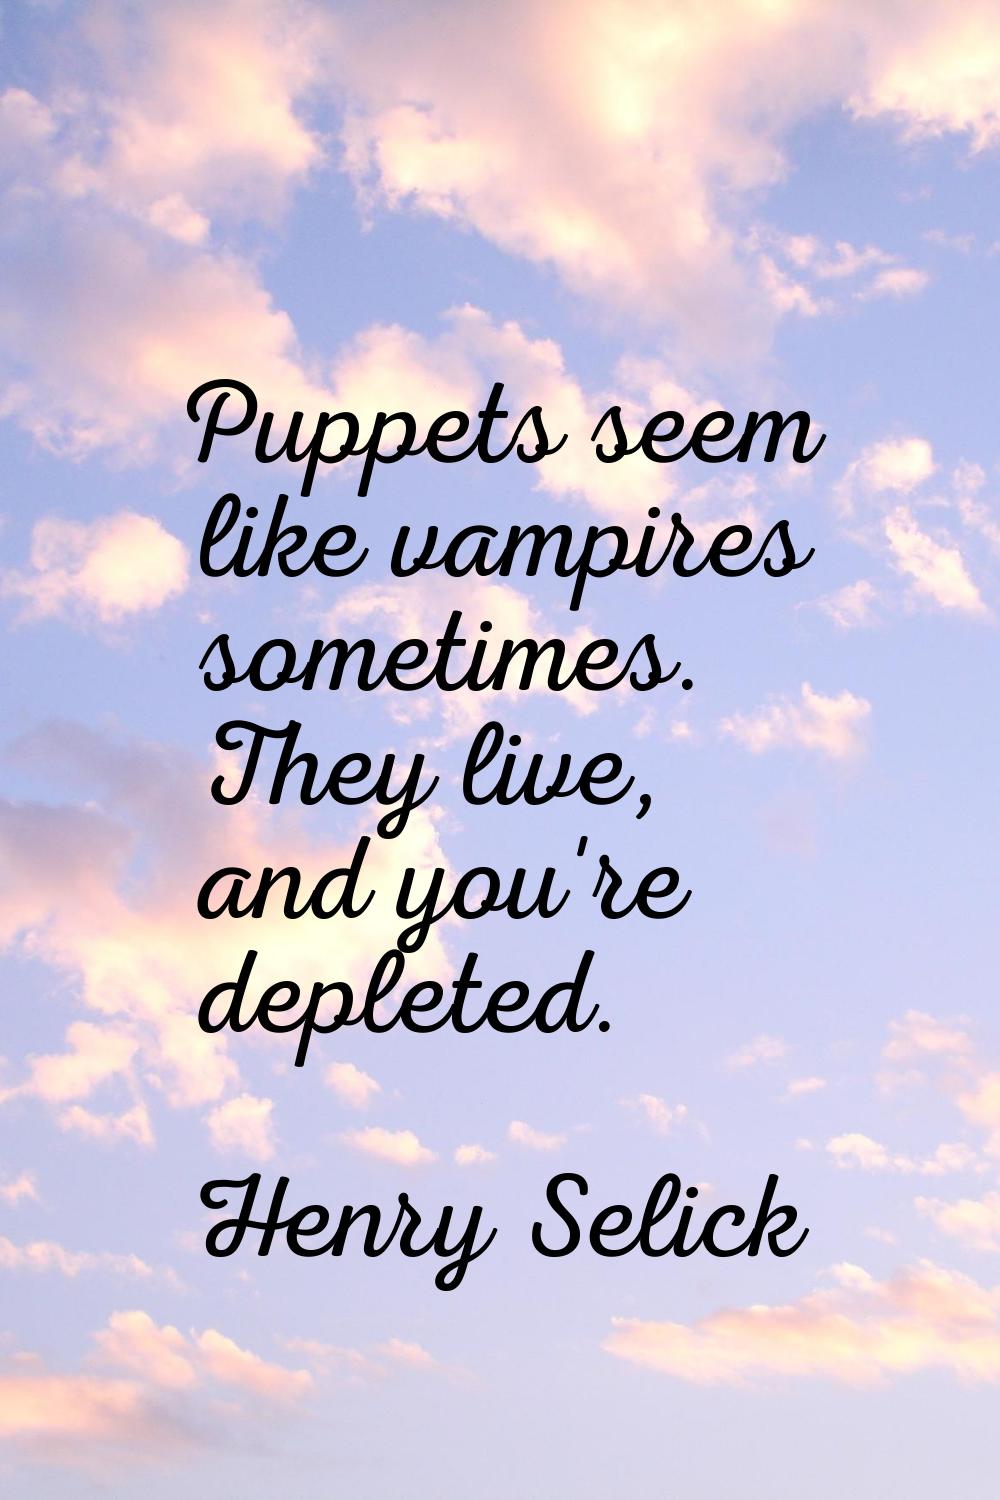 Puppets seem like vampires sometimes. They live, and you're depleted.